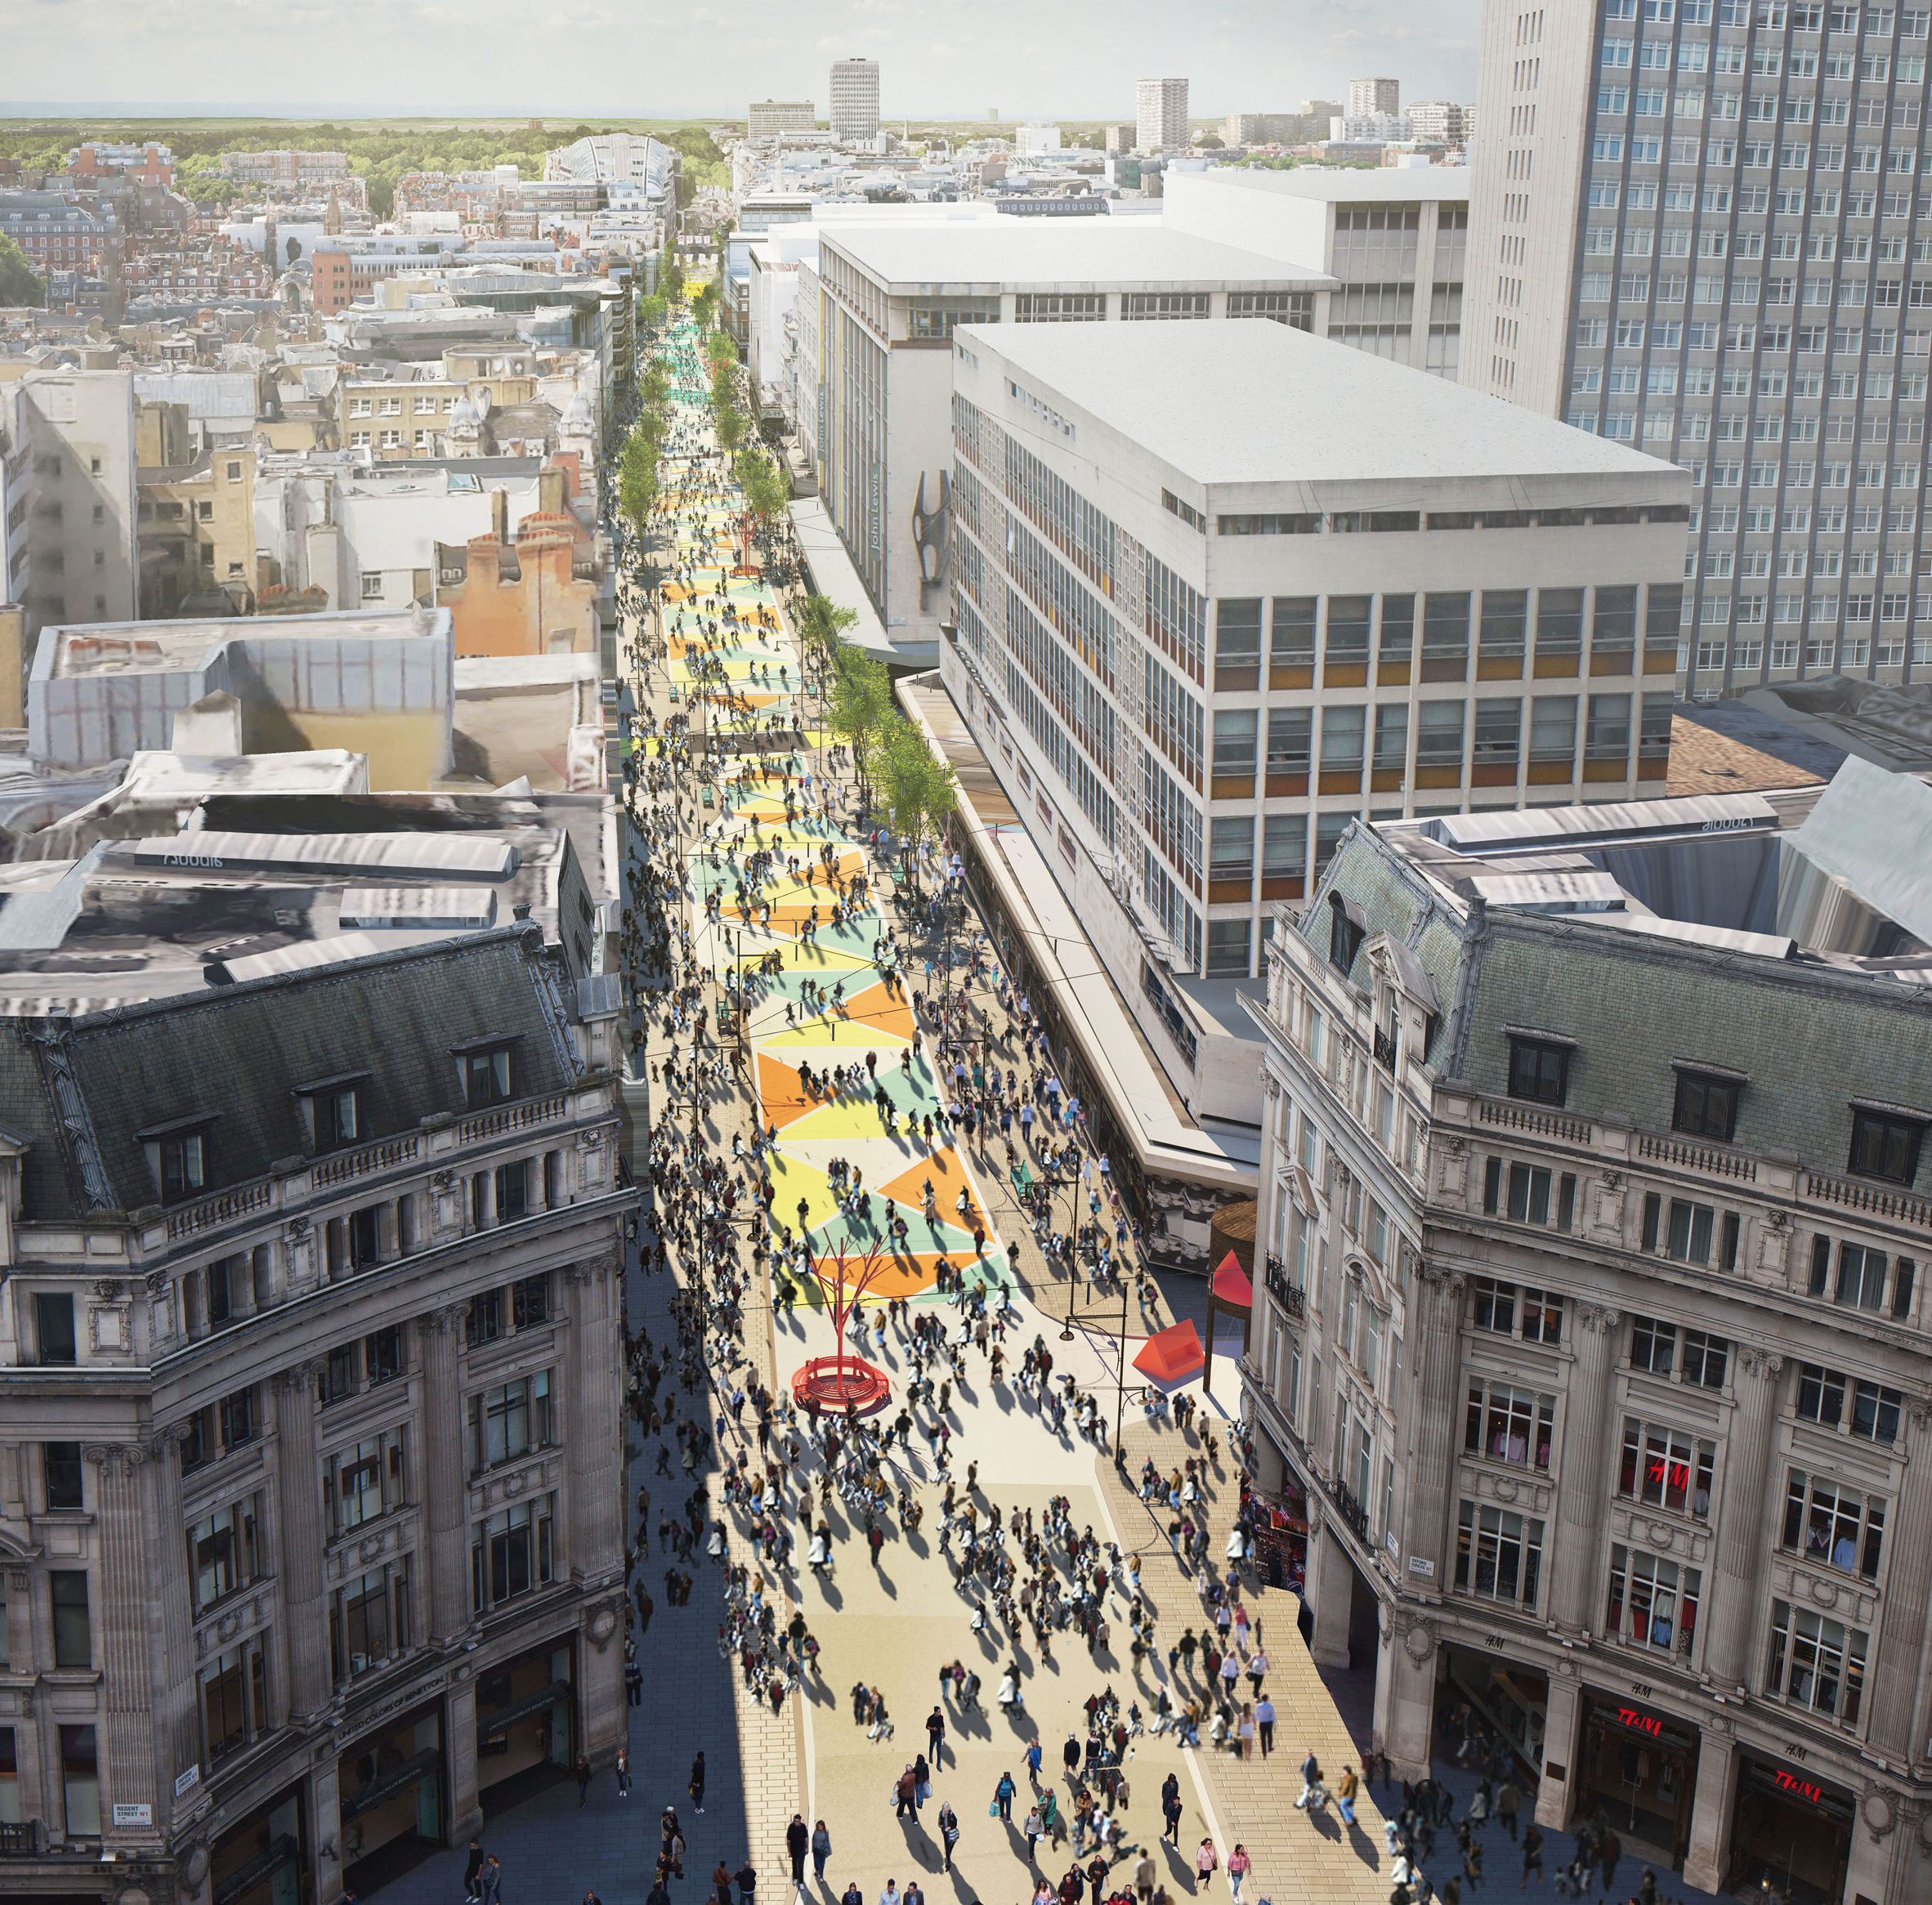 Scrapping plans for car-free Oxford Street is a "betrayal of Londoners" says city mayor